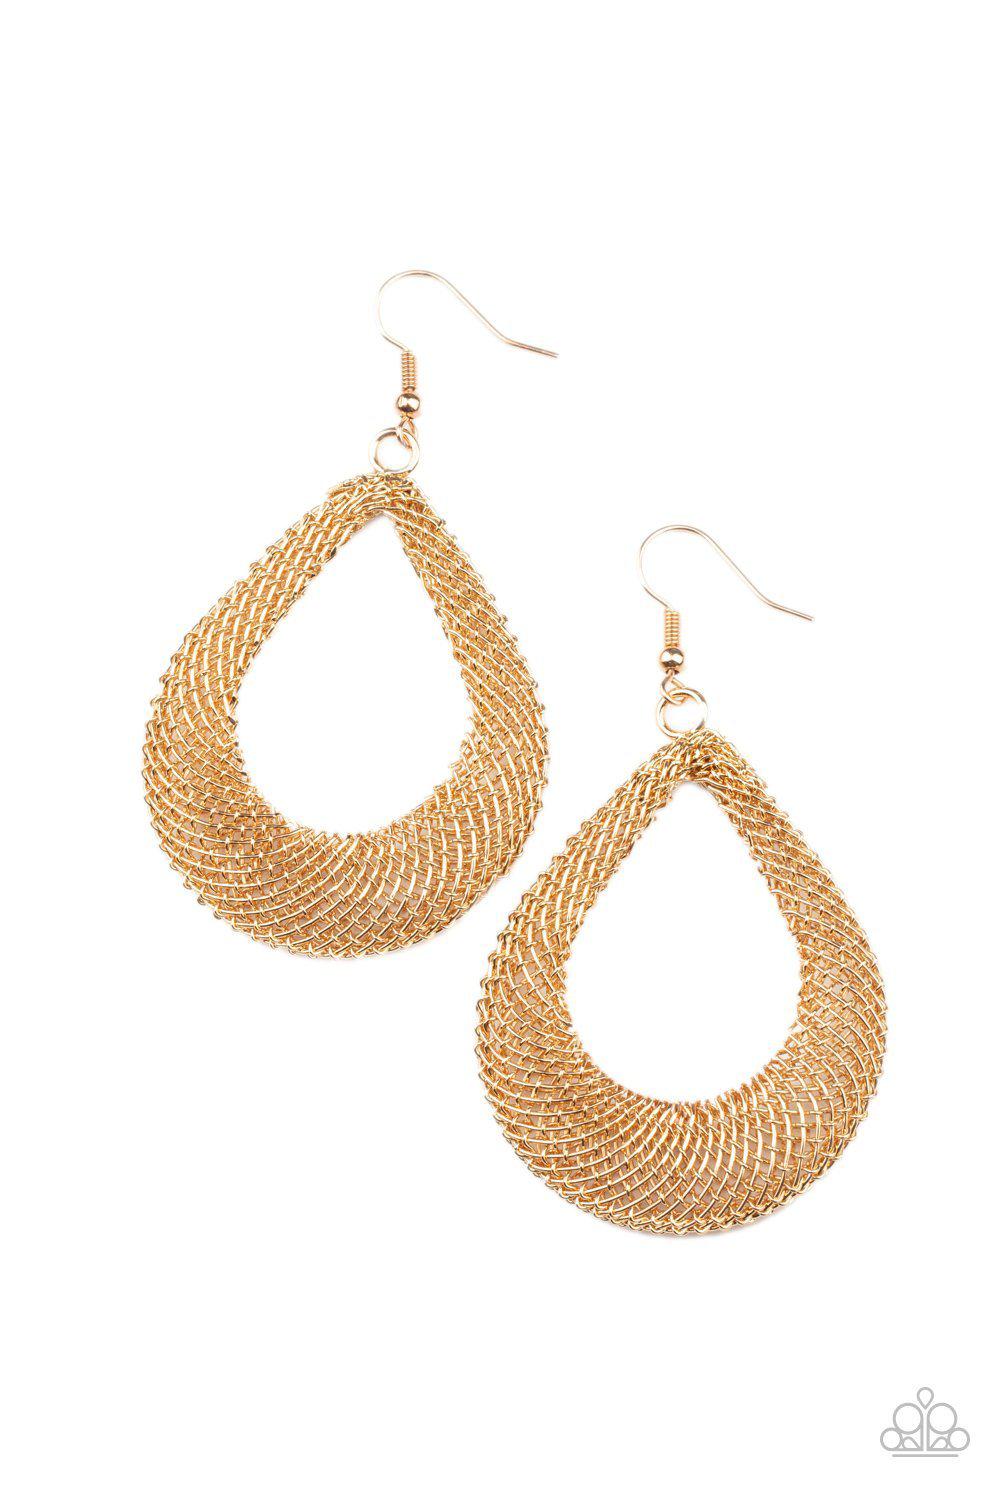 A Hot MESH Gold Teardrop Earrings - Paparazzi Accessories- lightbox - CarasShop.com - $5 Jewelry by Cara Jewels